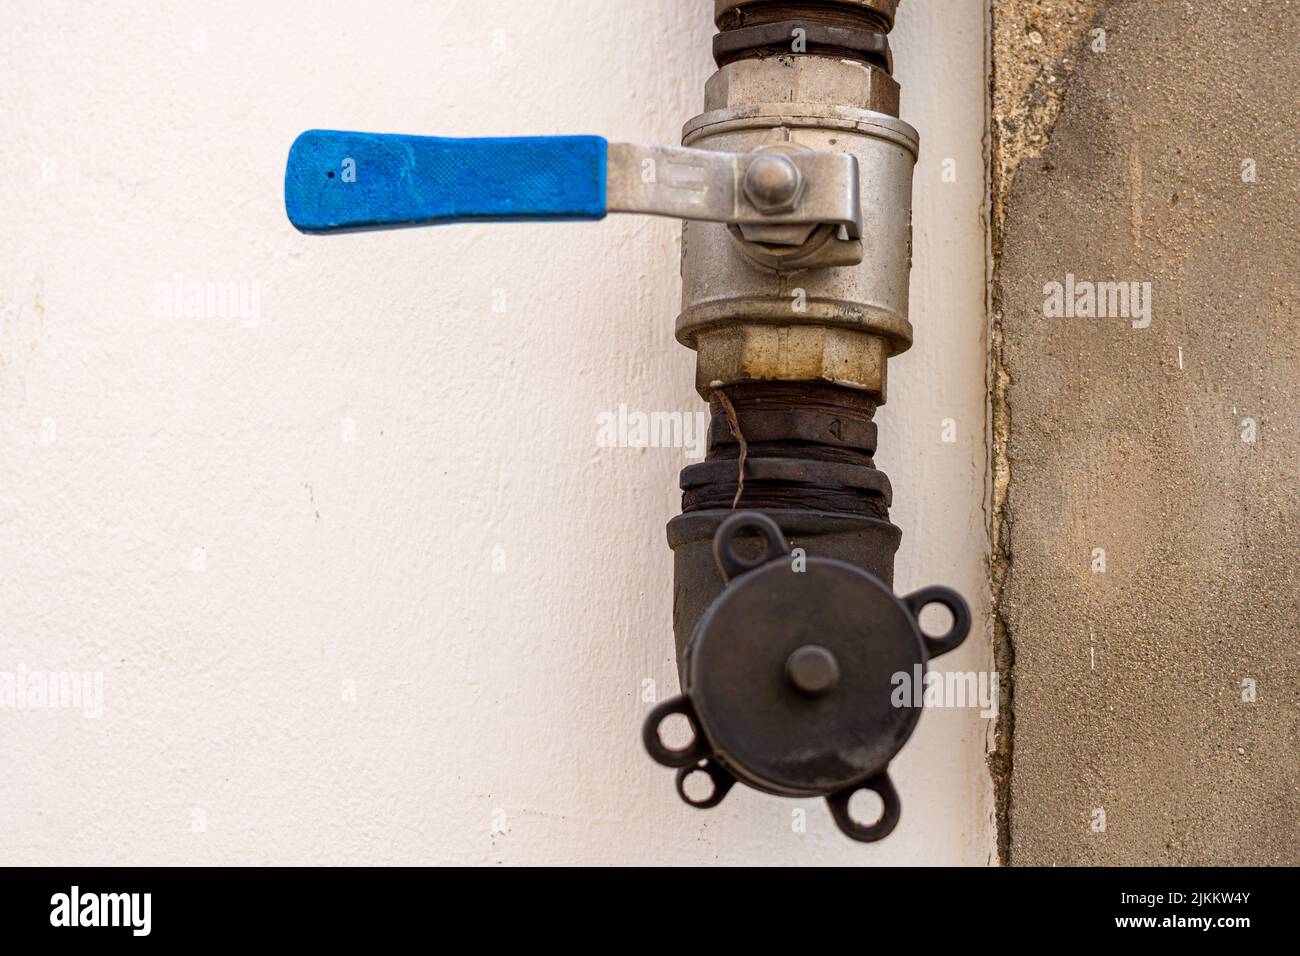 The Old valve stopcock with the blue pipe. Stock Photo